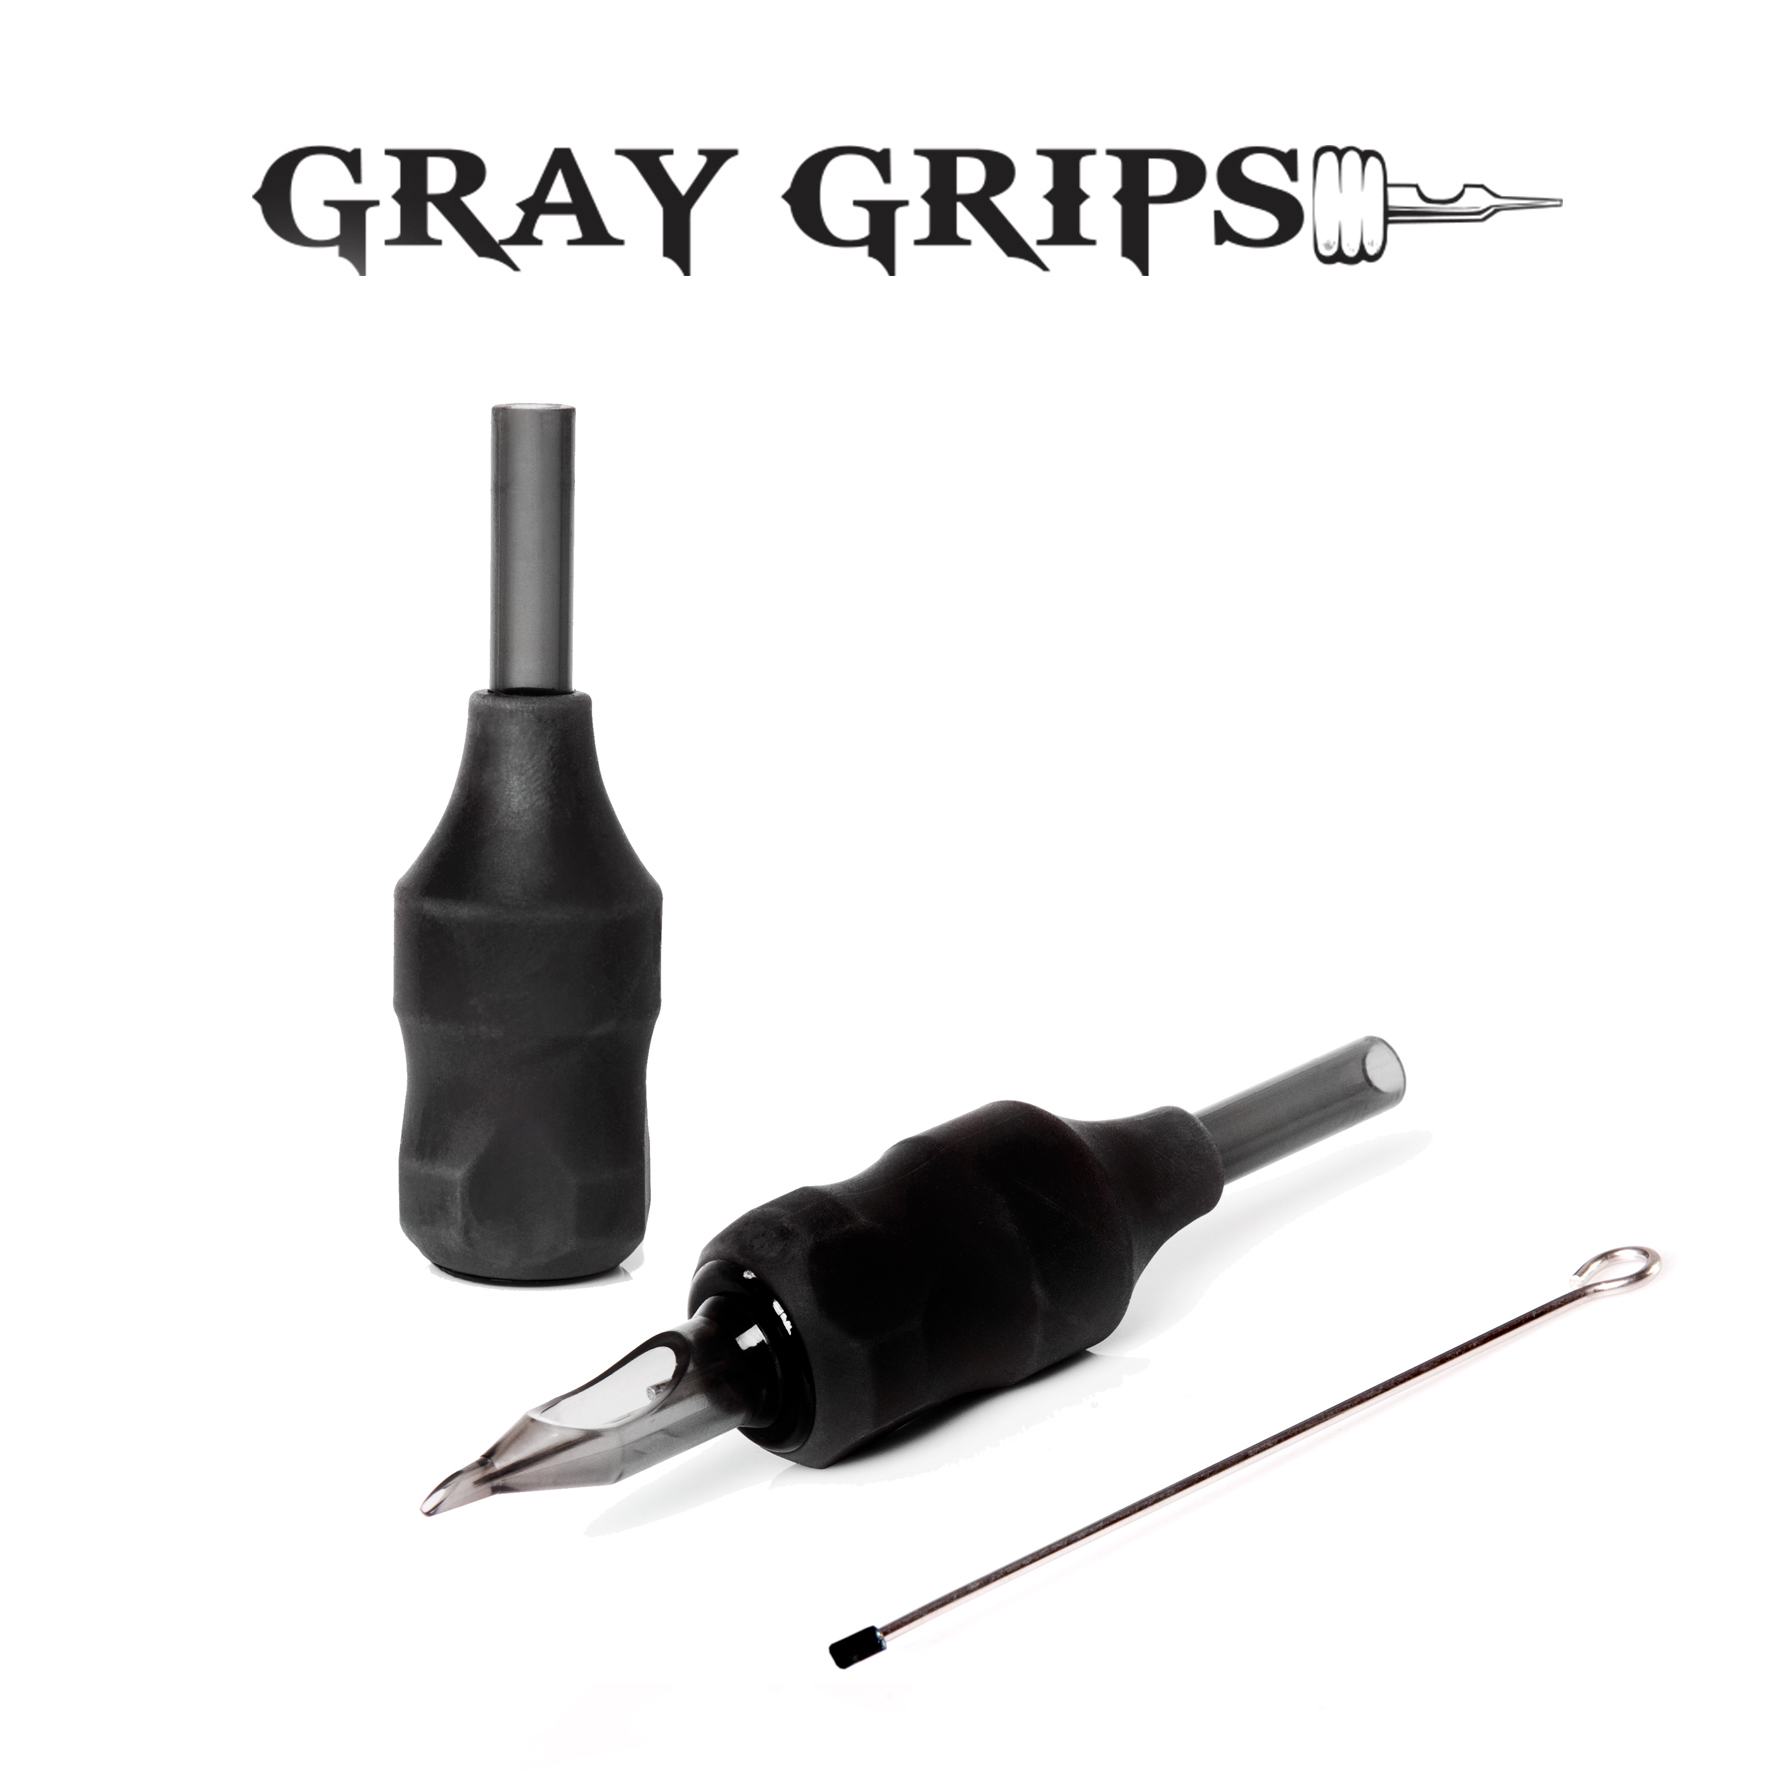 GRAY GRPIS disposable CARDRIGE GRIPS